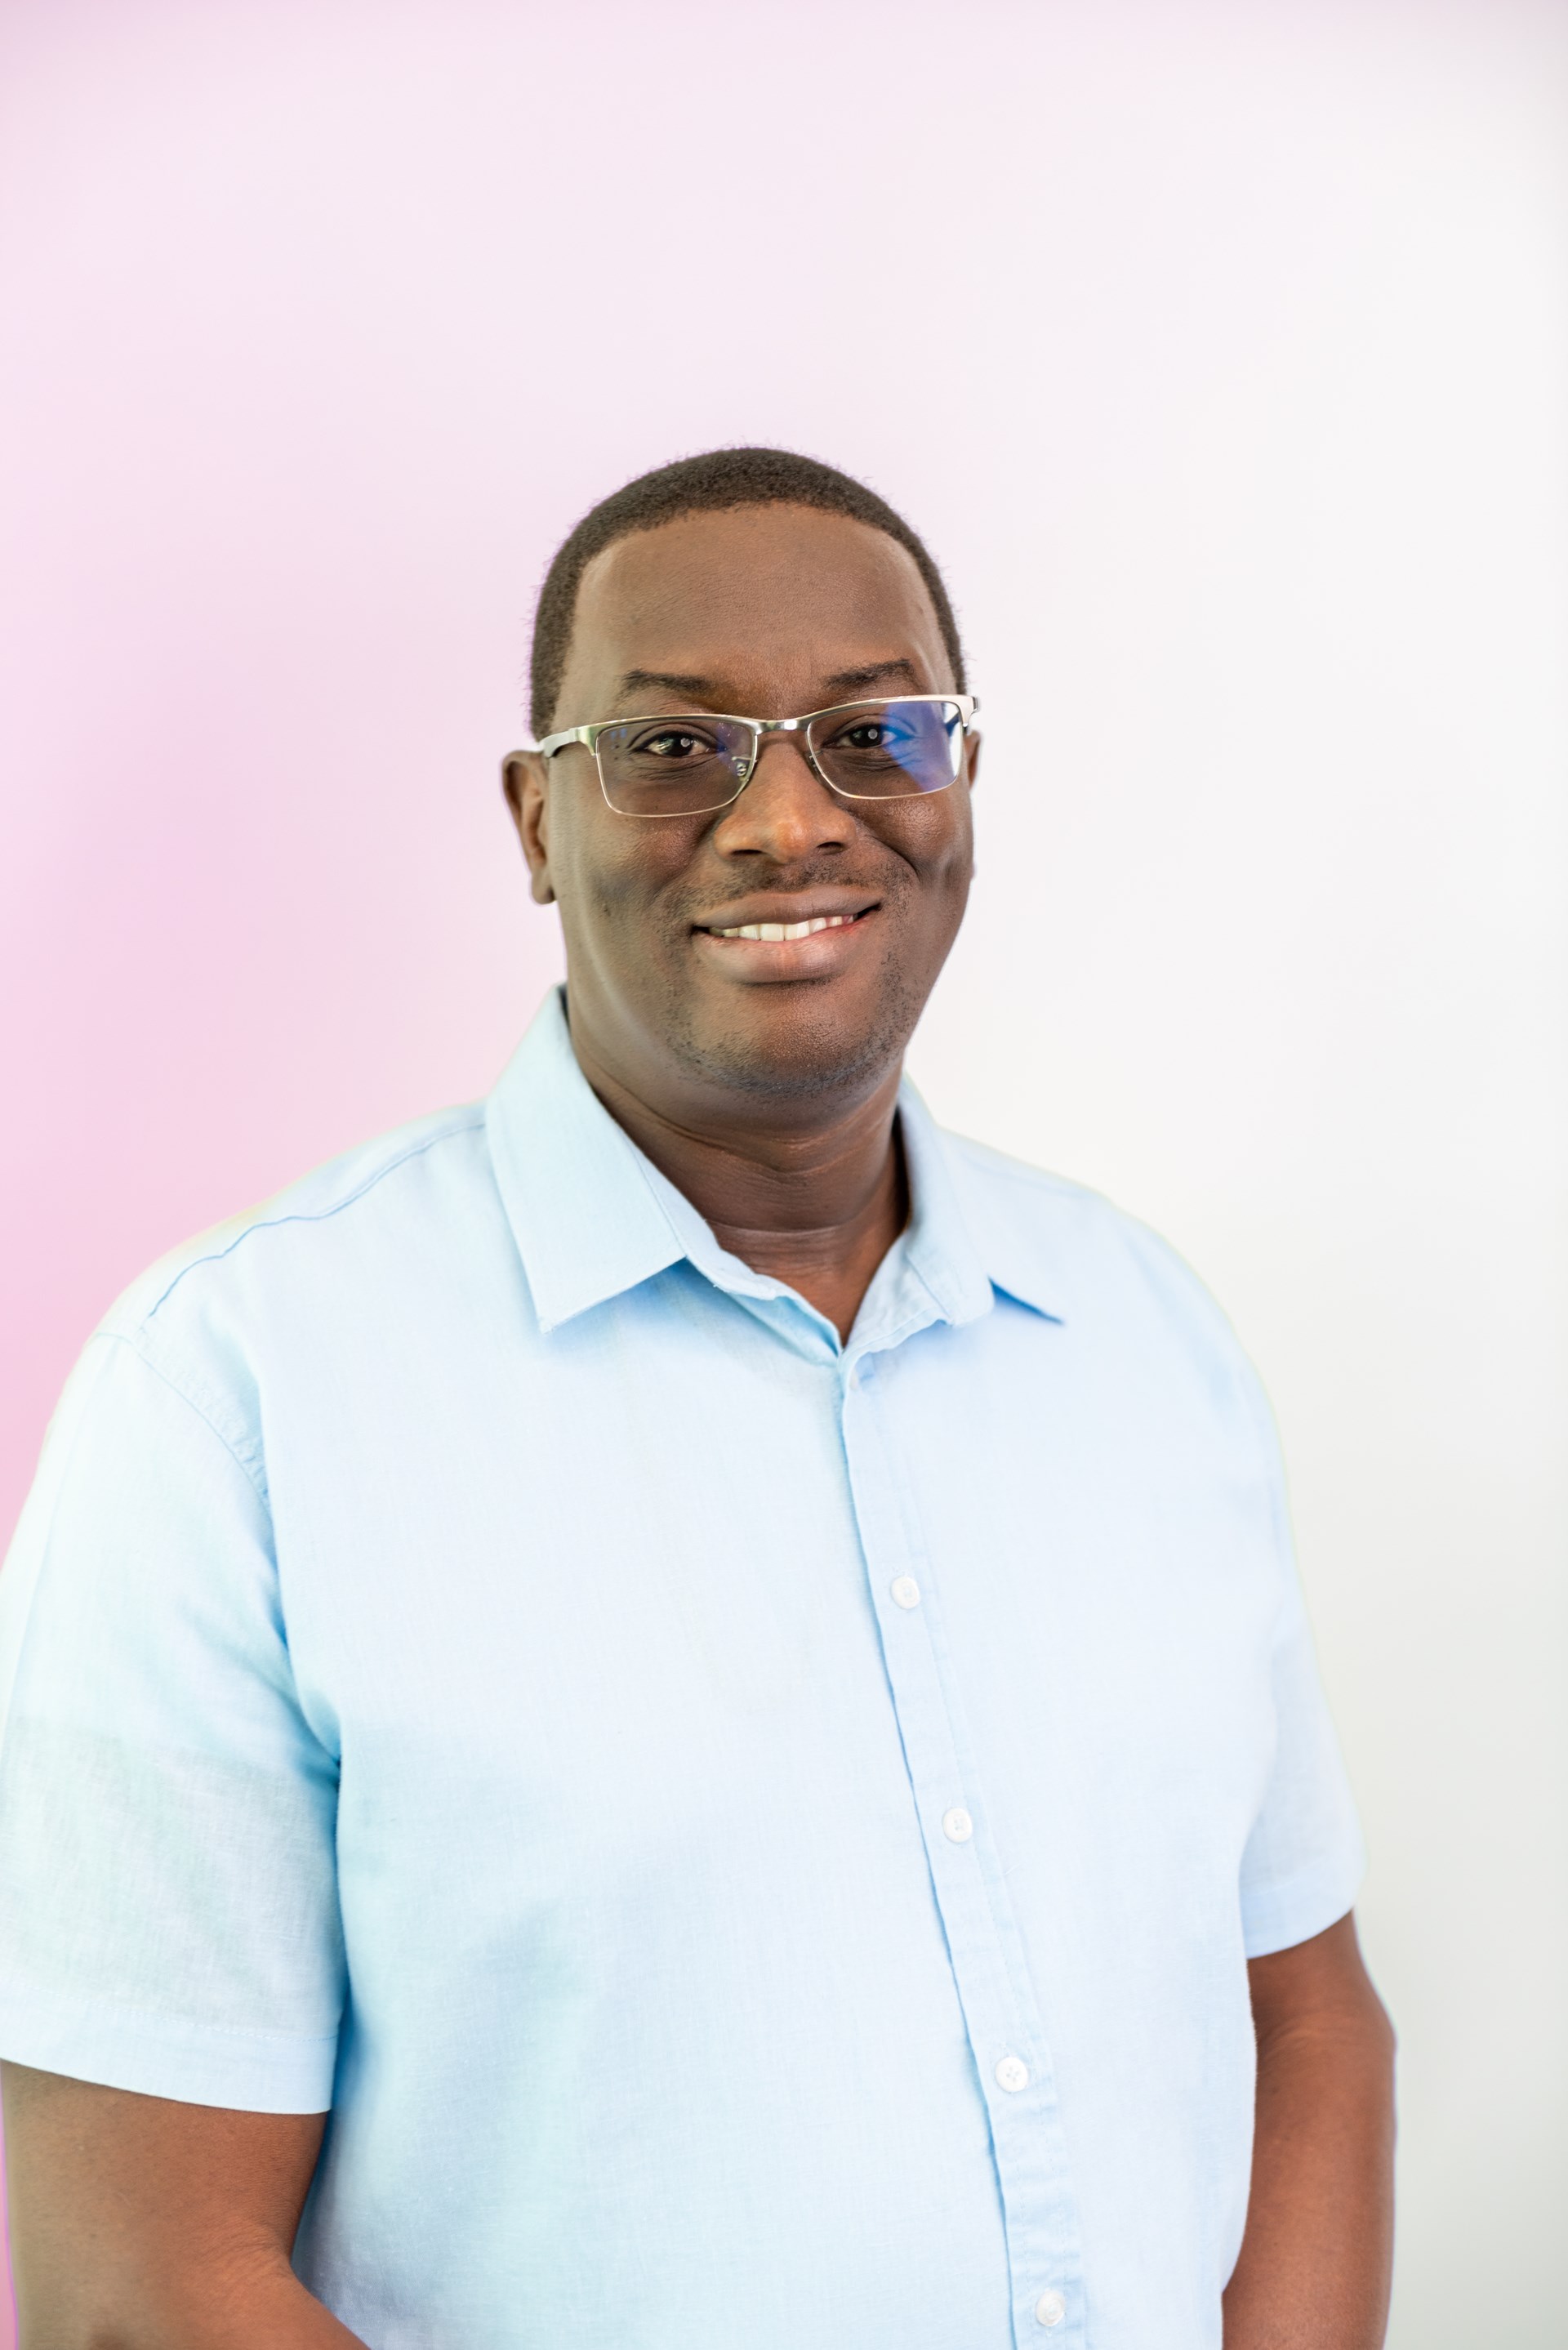 black man with glasses smiles at camera